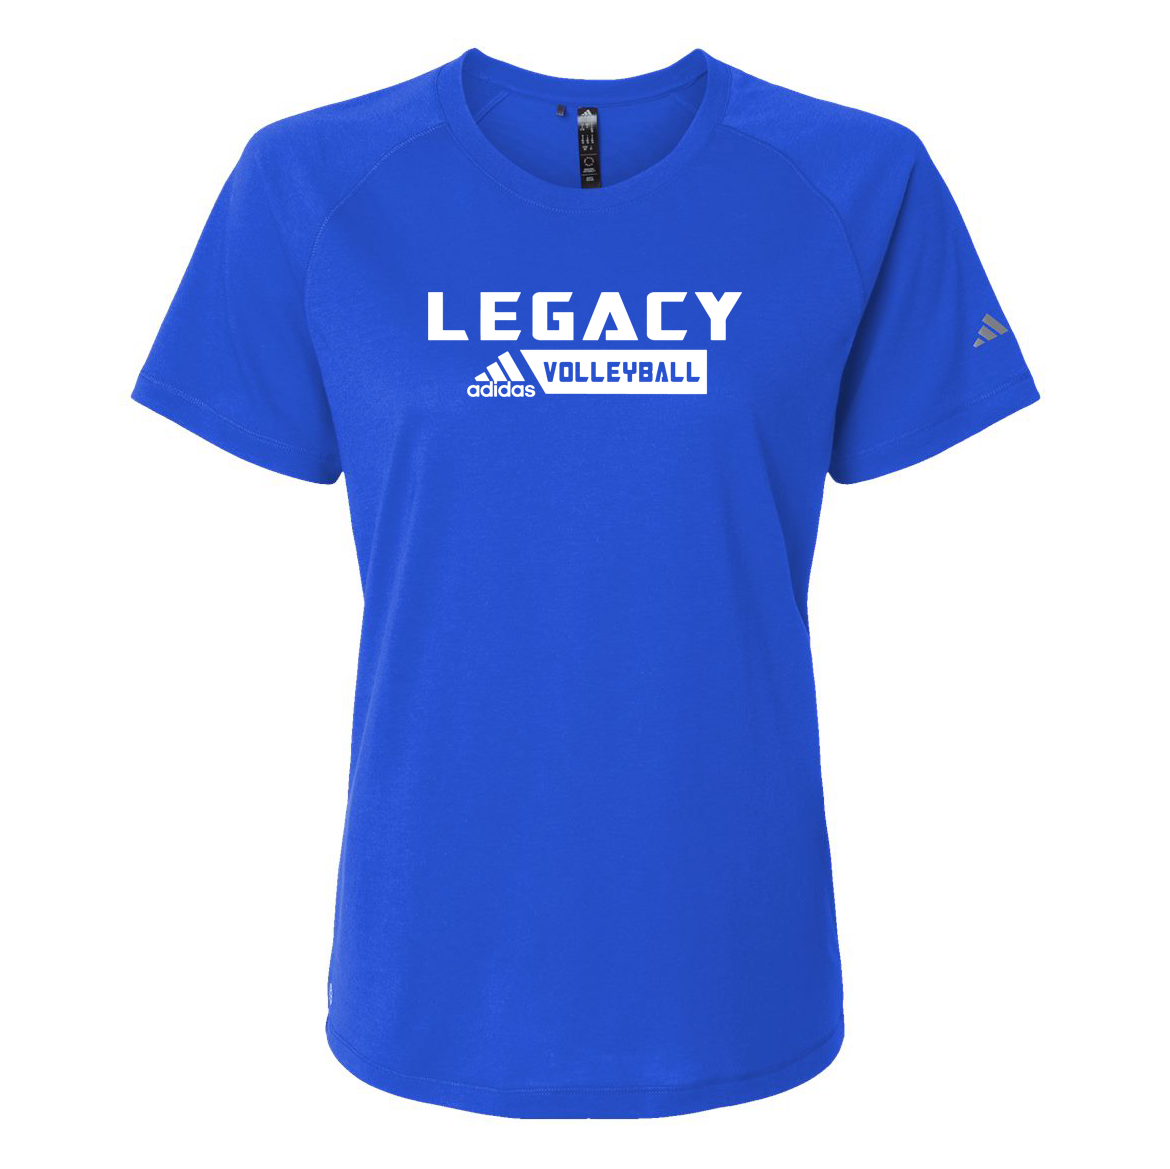 Legacy Volleyball Club Adidas Ladies Blended T-Shirt